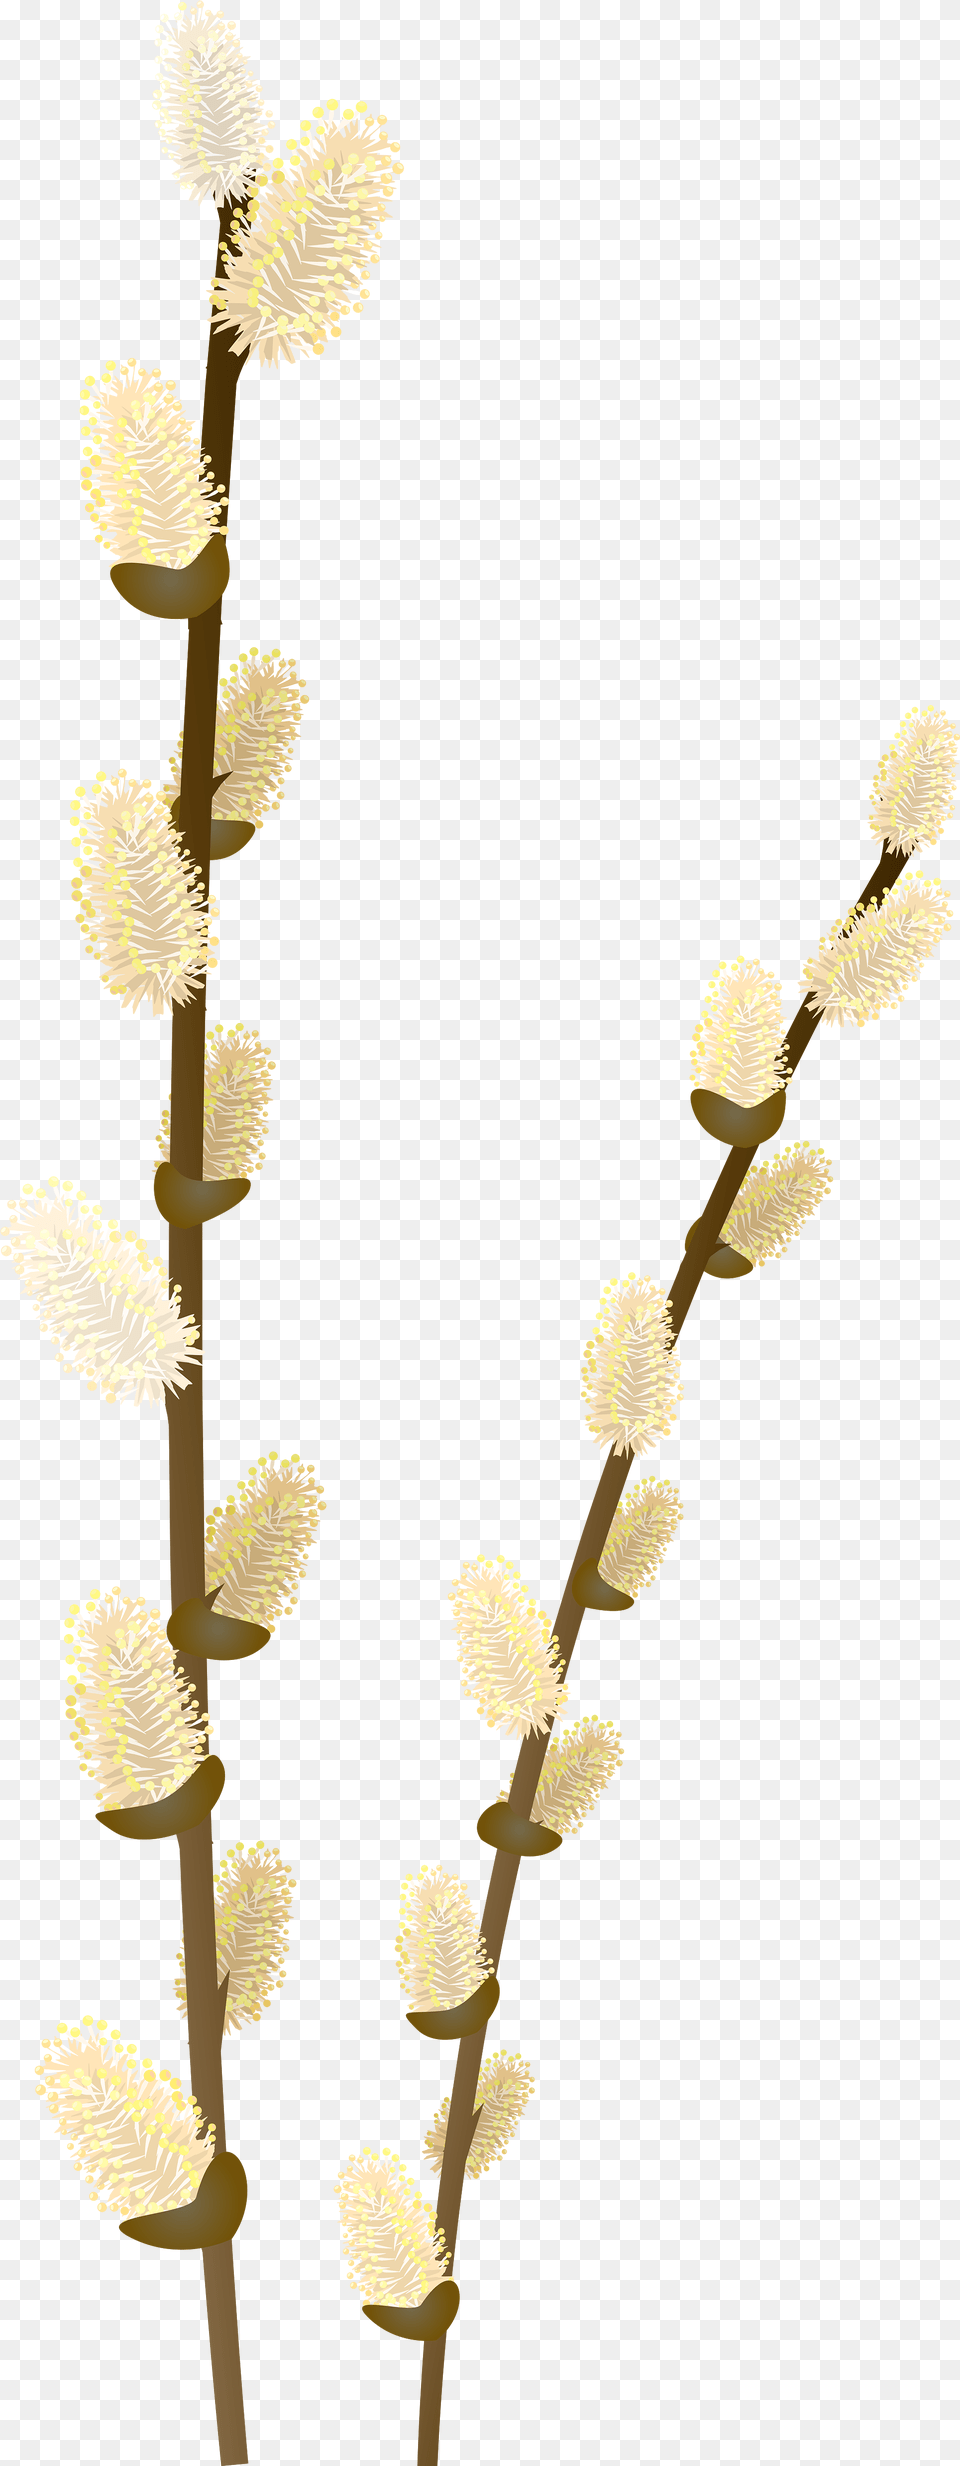 Willow Tree Clip Art Weeping, Plant, Grass, Flower, Bud Png